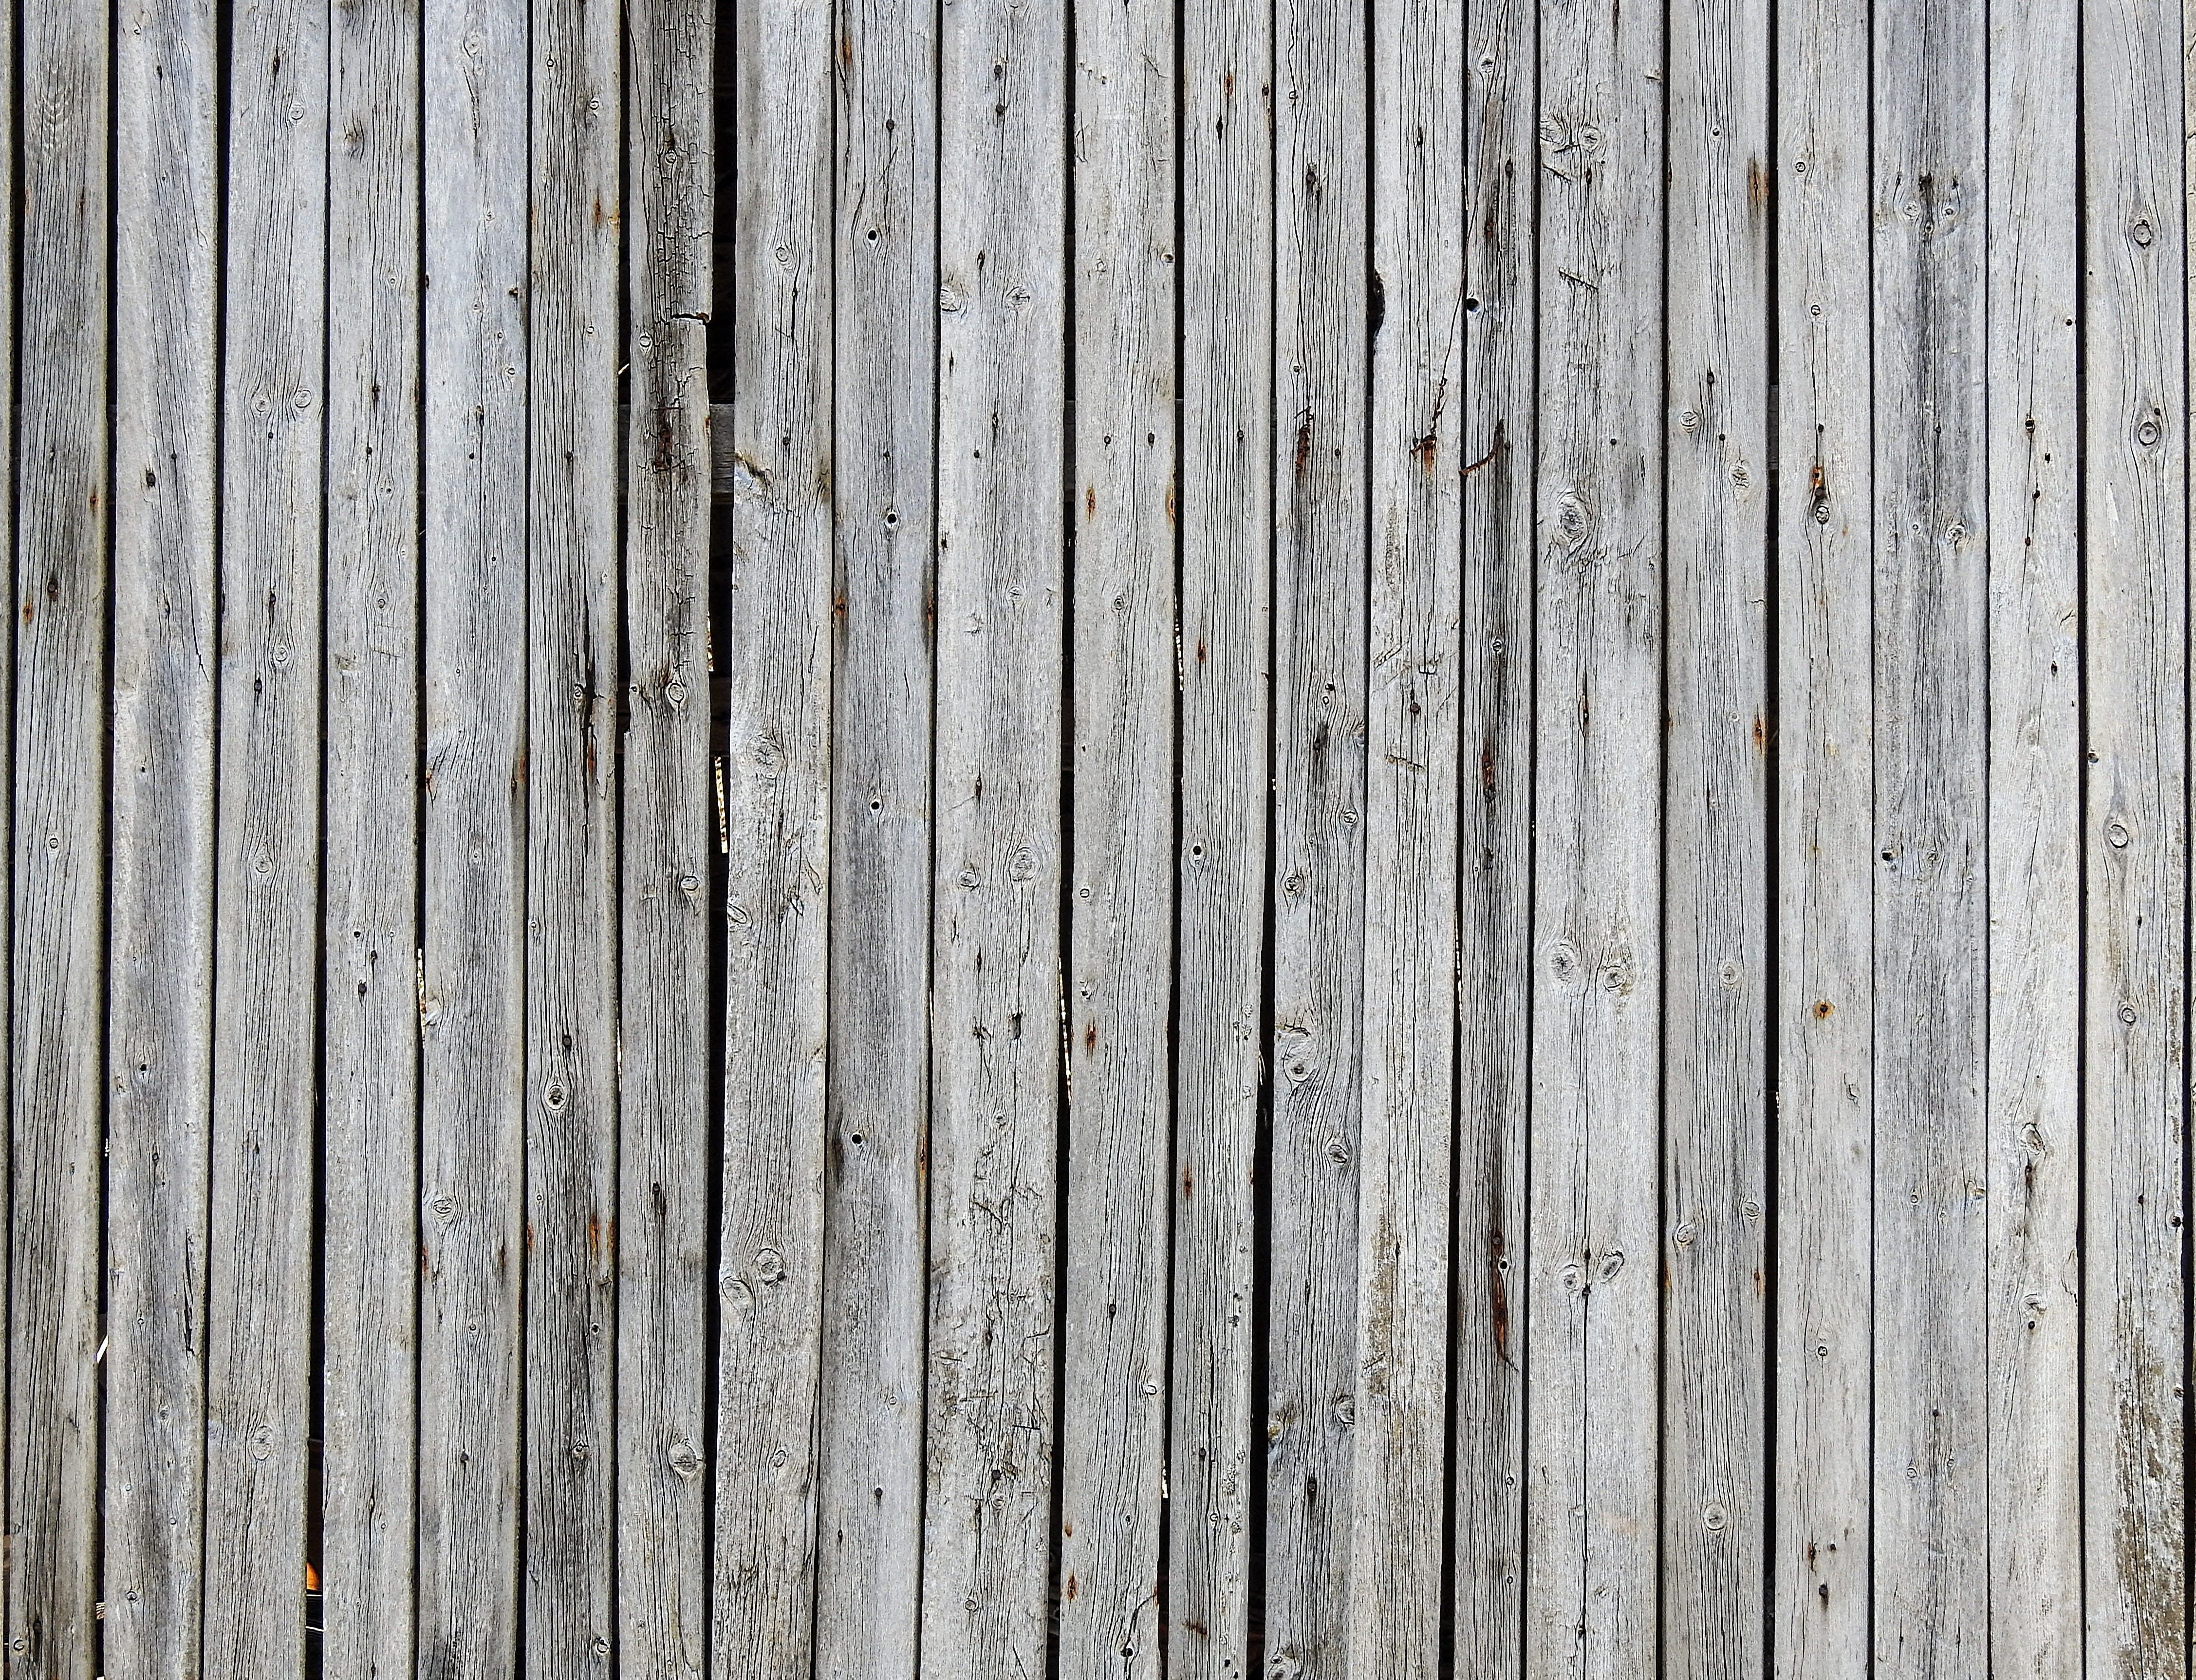  Planke Hintergrundbild 4510x3450. Wallpaper / wood, boundary, decoration, barrier, pattern, retro, full frame, 4K, rustic, rough, design, timber, bord, Background, gray, no people, Wood, plank, outdoors free download